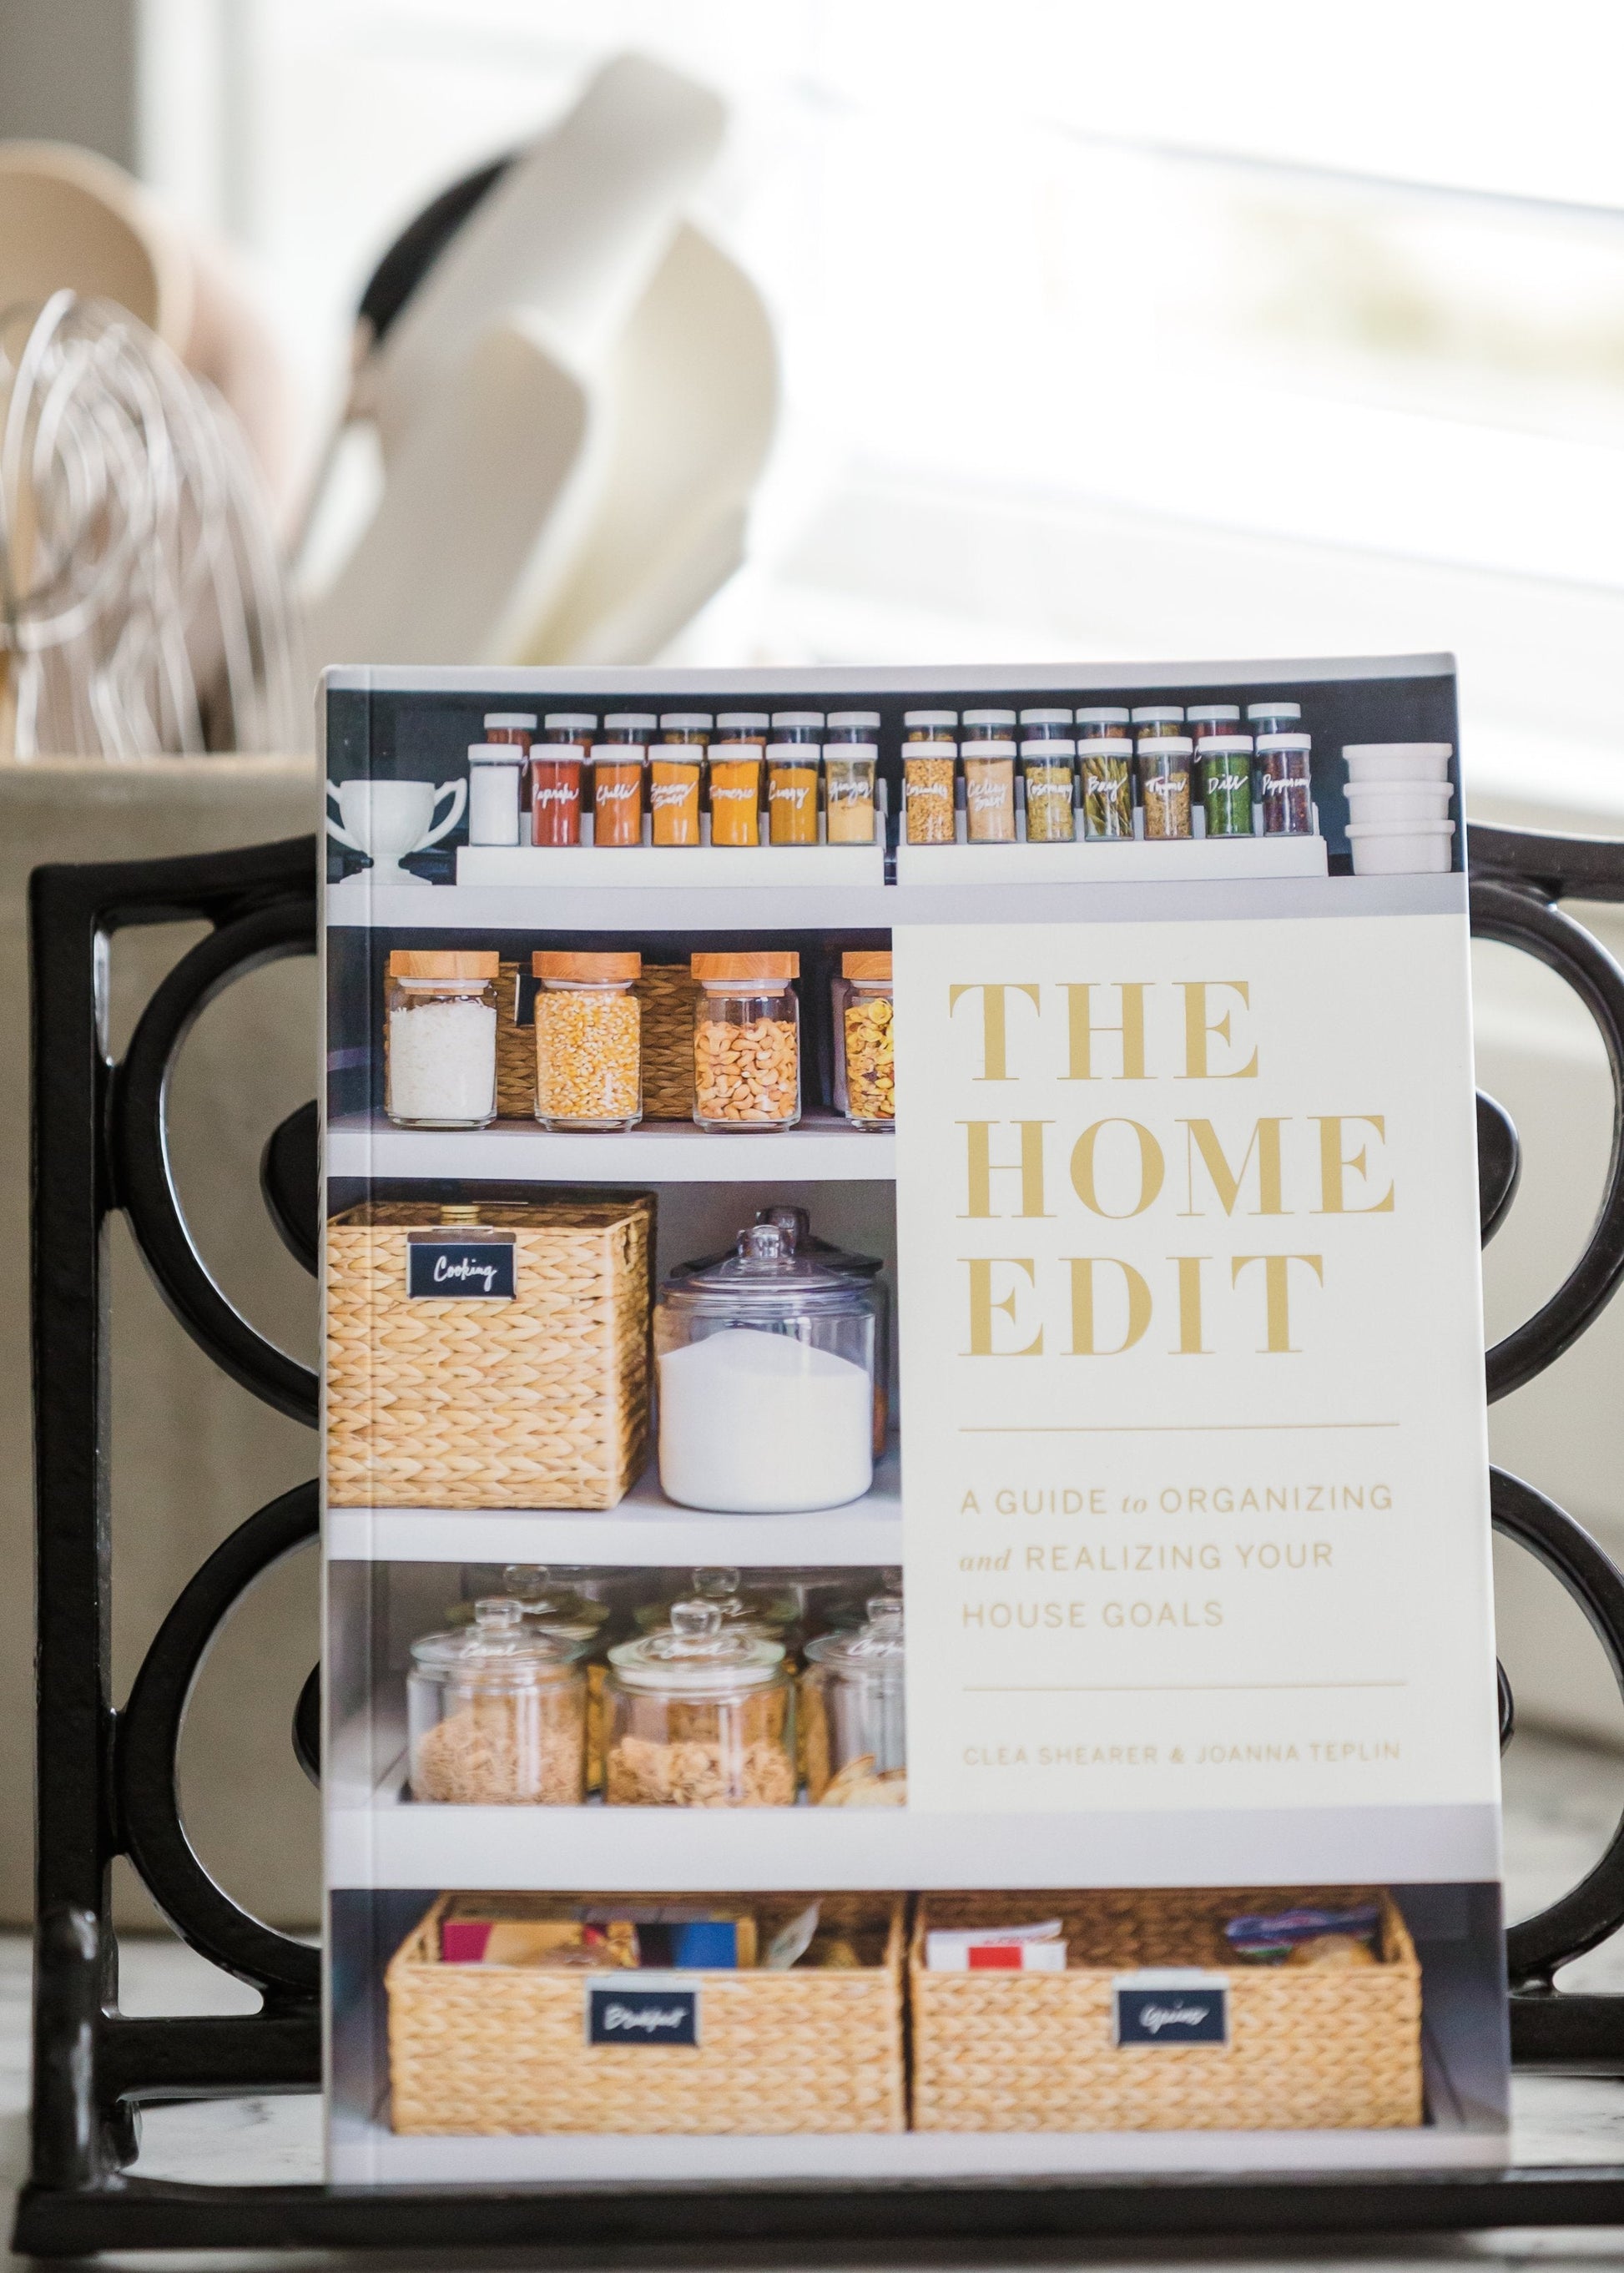 The Home Edit Life Book Home & Lifestyle